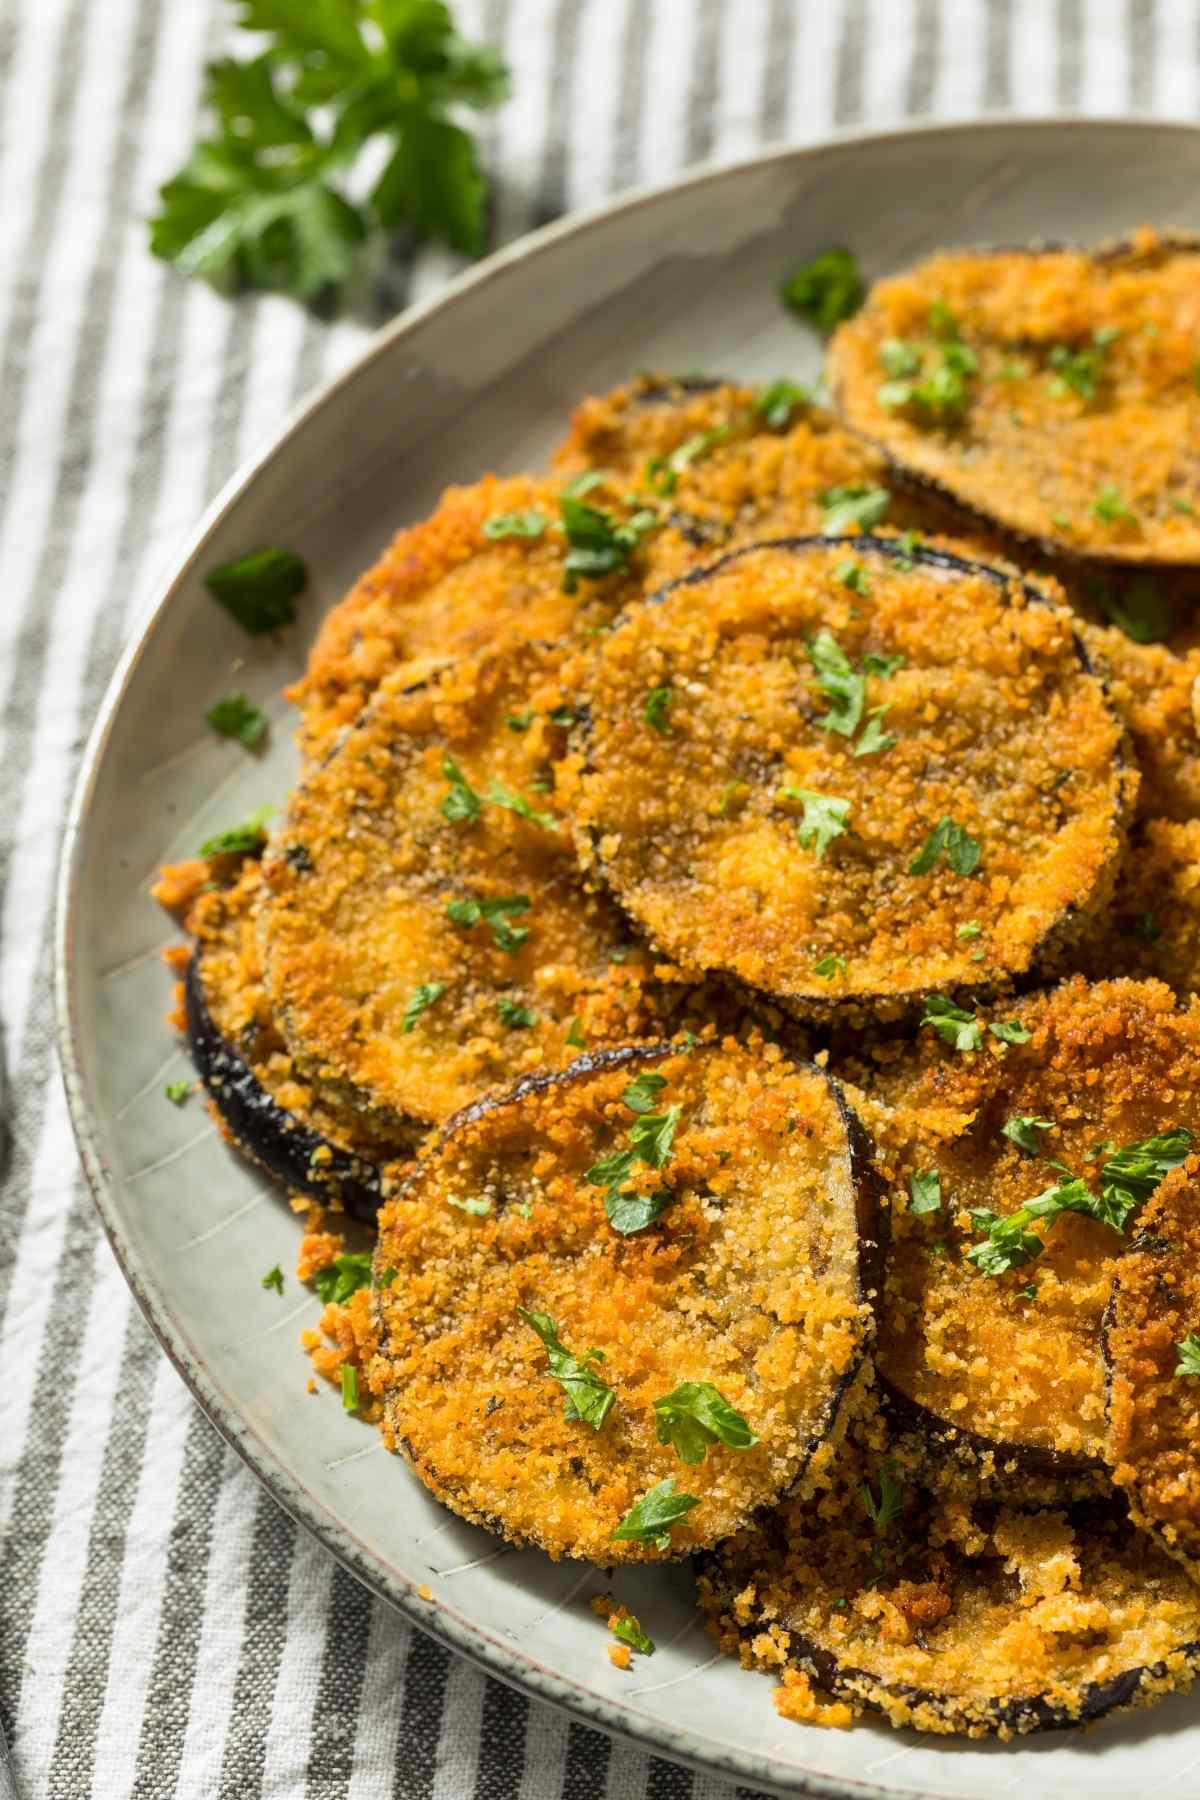 This tasty fried eggplant takes less than 30 minutes to make and is deliciously crisp. If you’re looking for a new side dish, give this recipe a try!